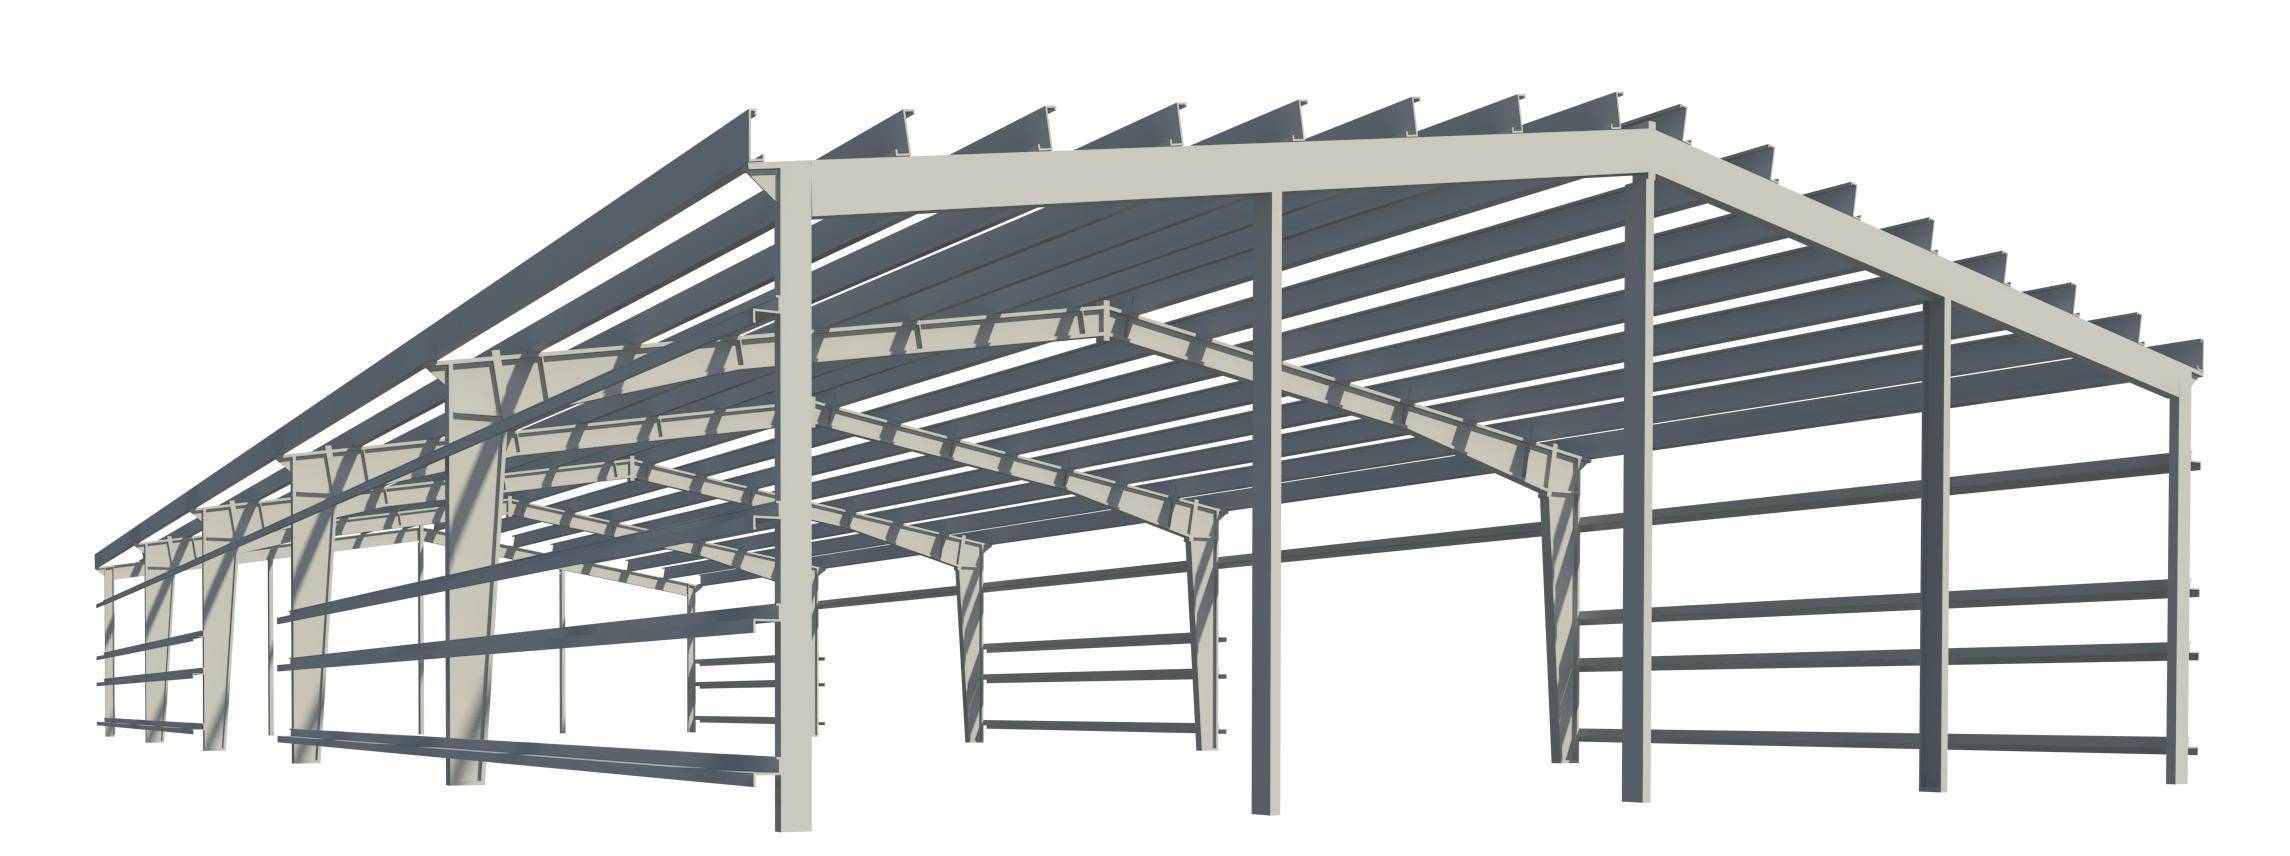 What criteria to evaluate prefabricated factories?